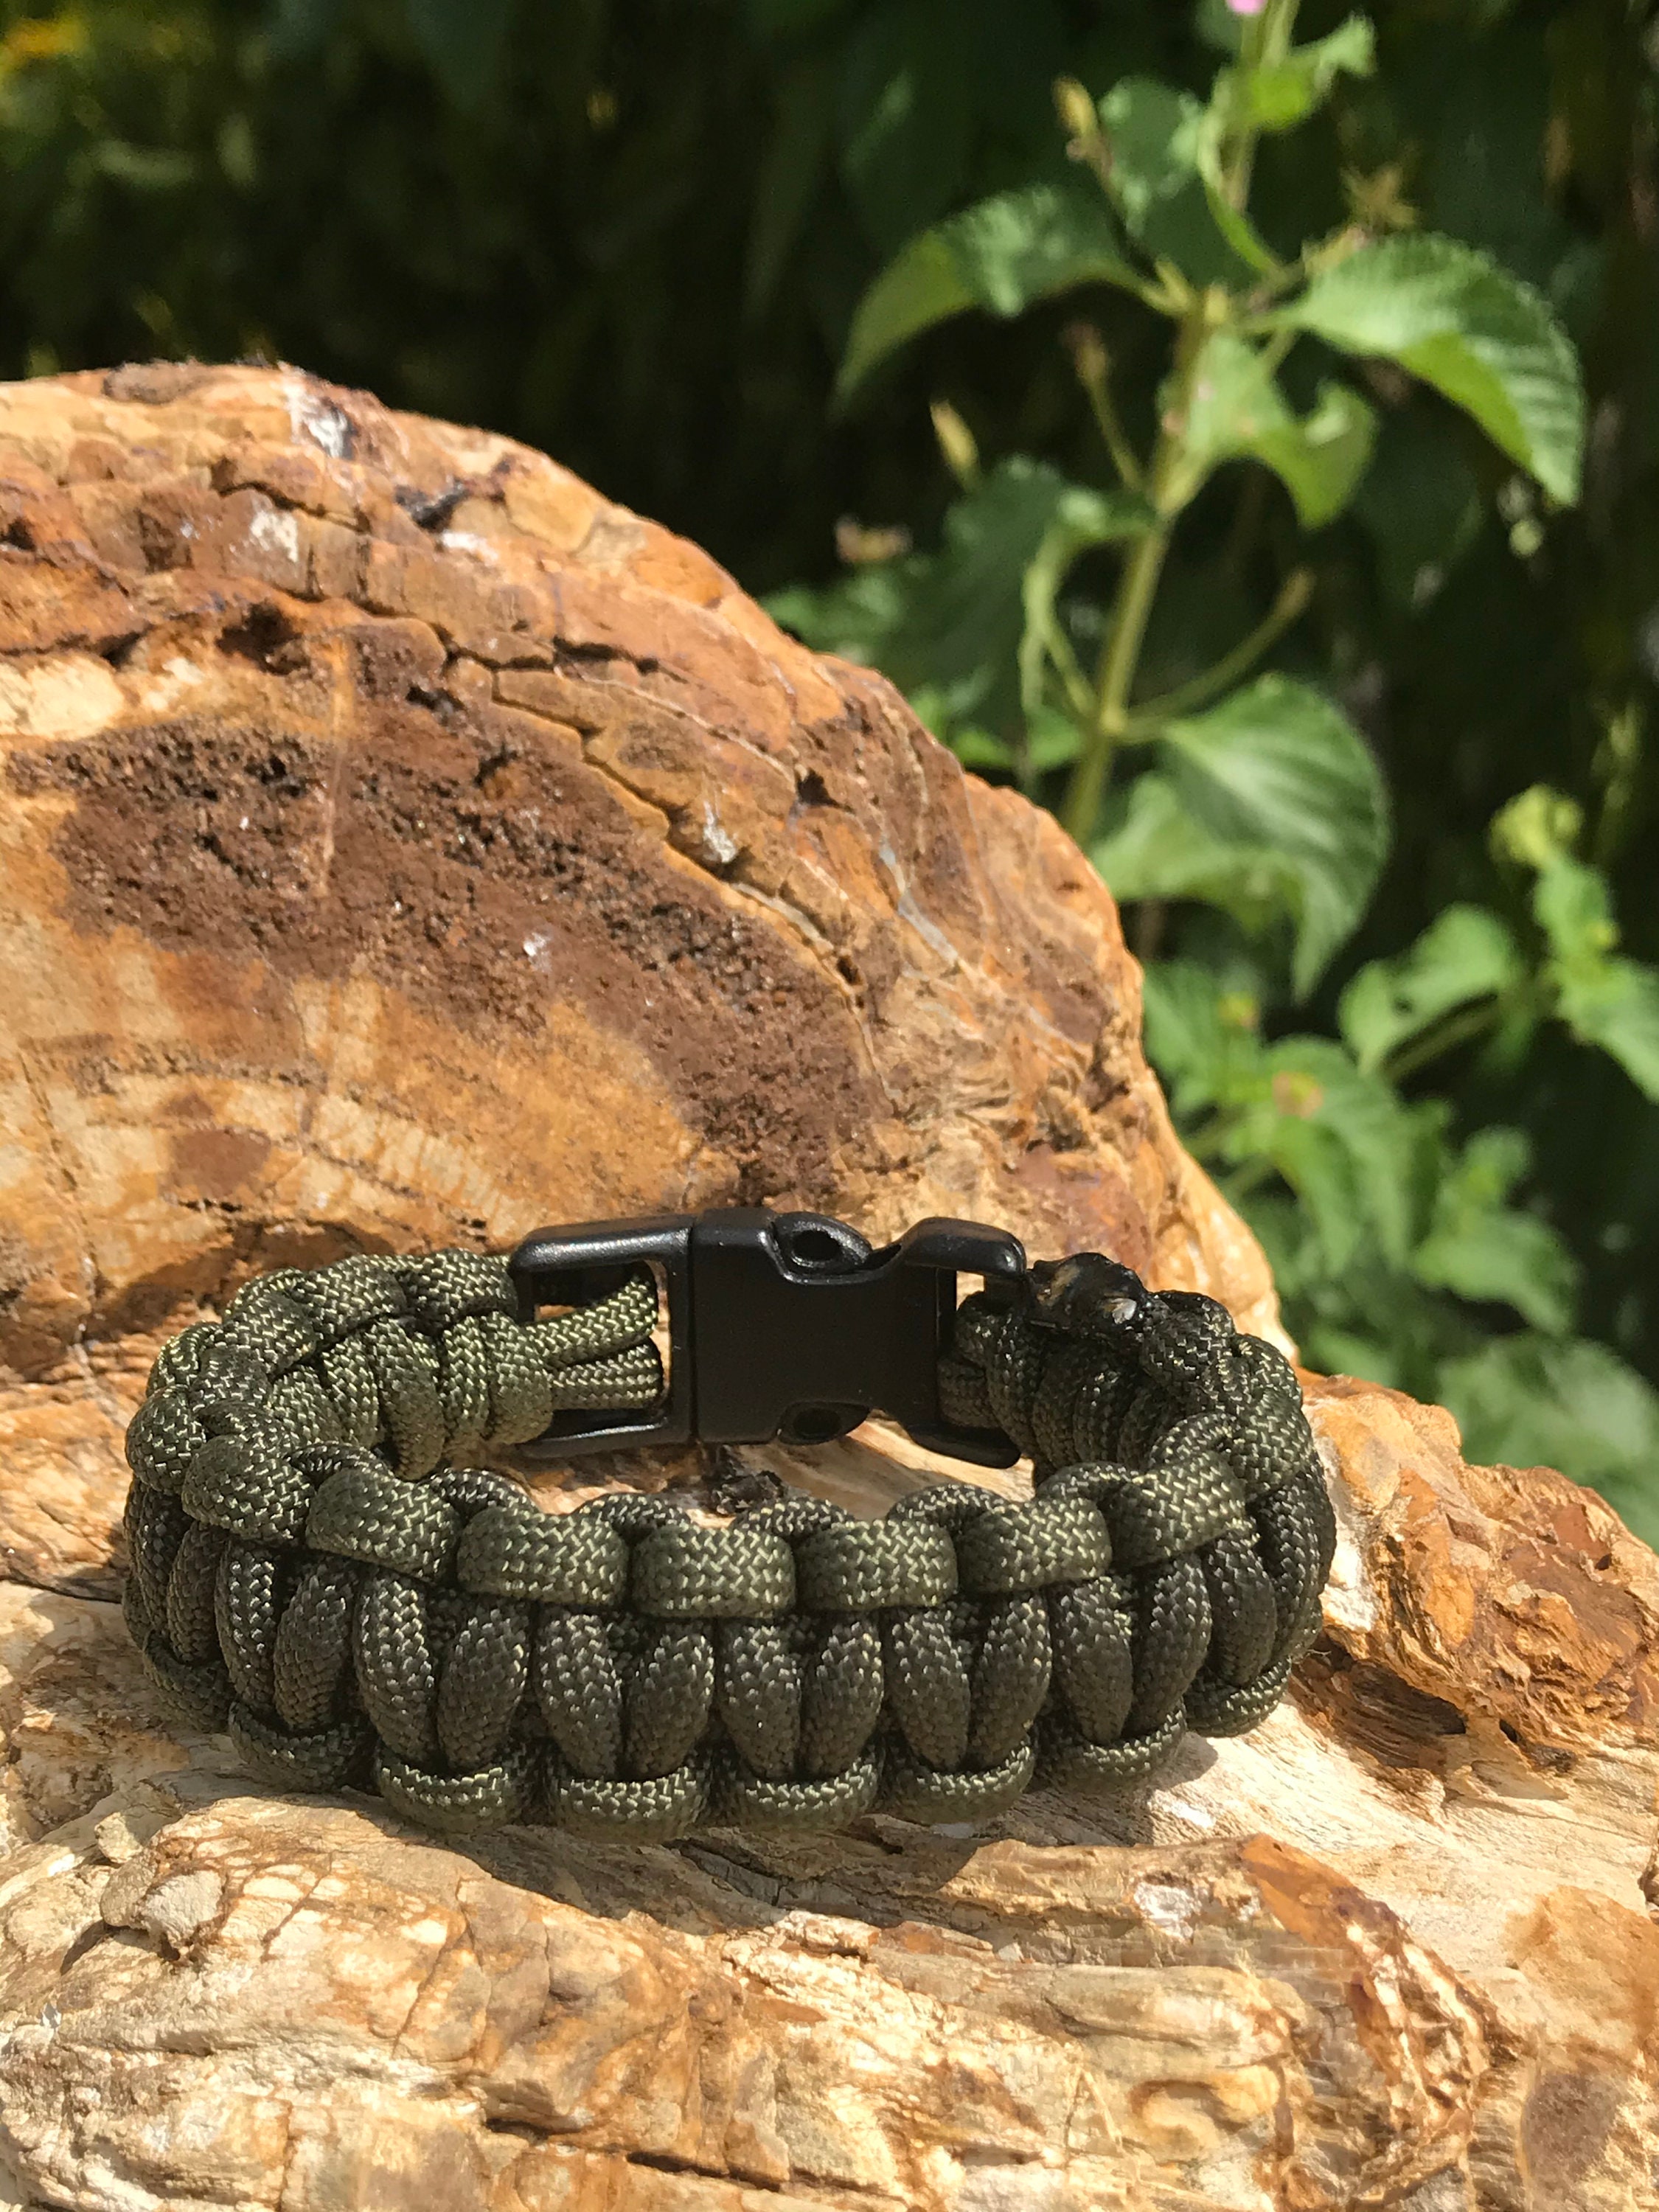 Premium Paracord Survival Bracelet OD Green, Made in USA